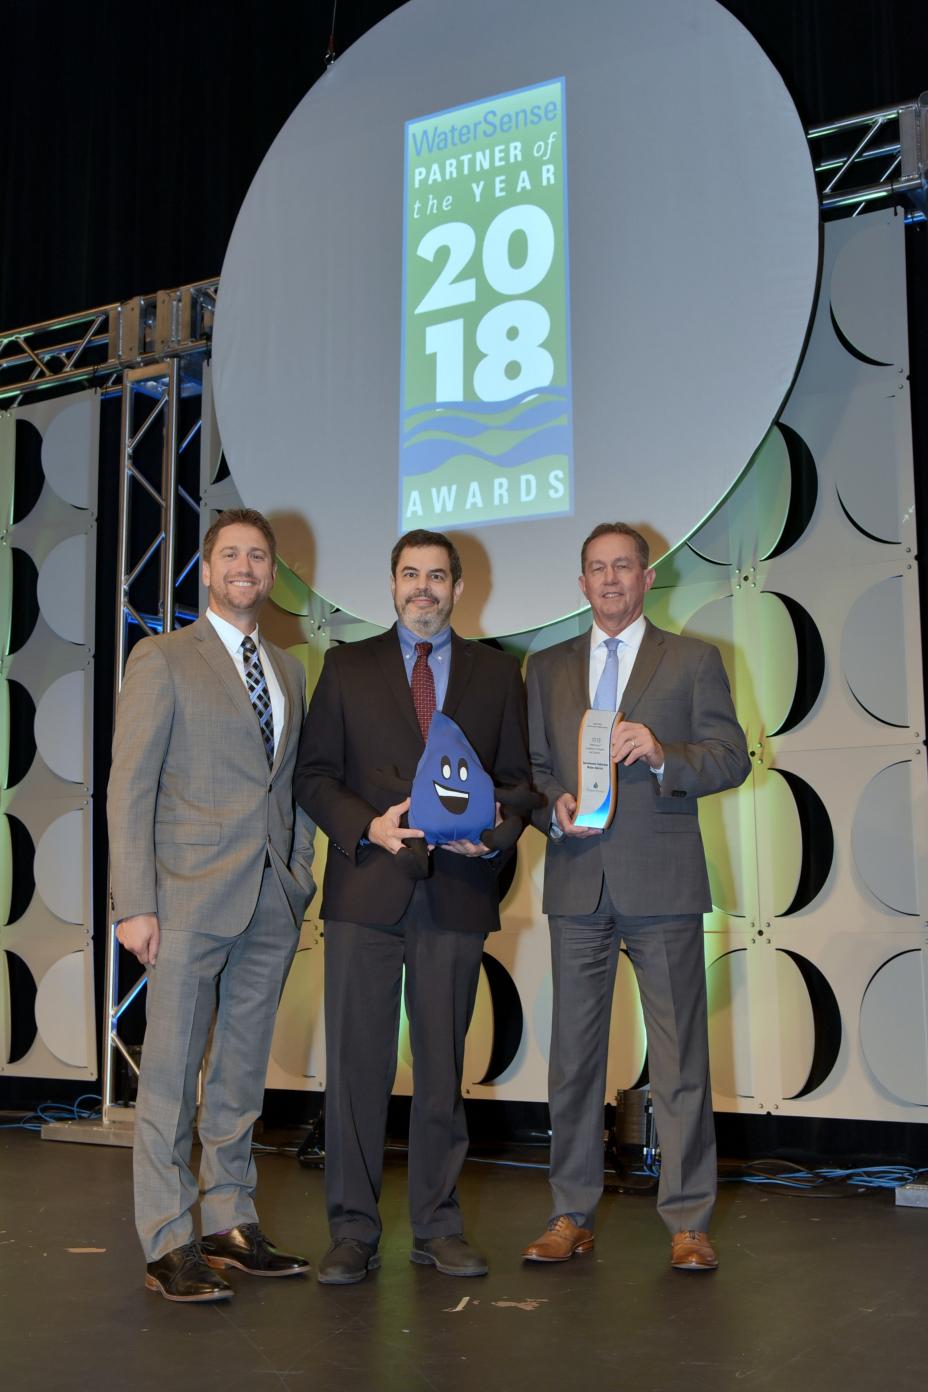 Excellence in Education and Outreach Award winner, Sacramento Suburban Water District, with U.S. EPA's Raffael Stein.